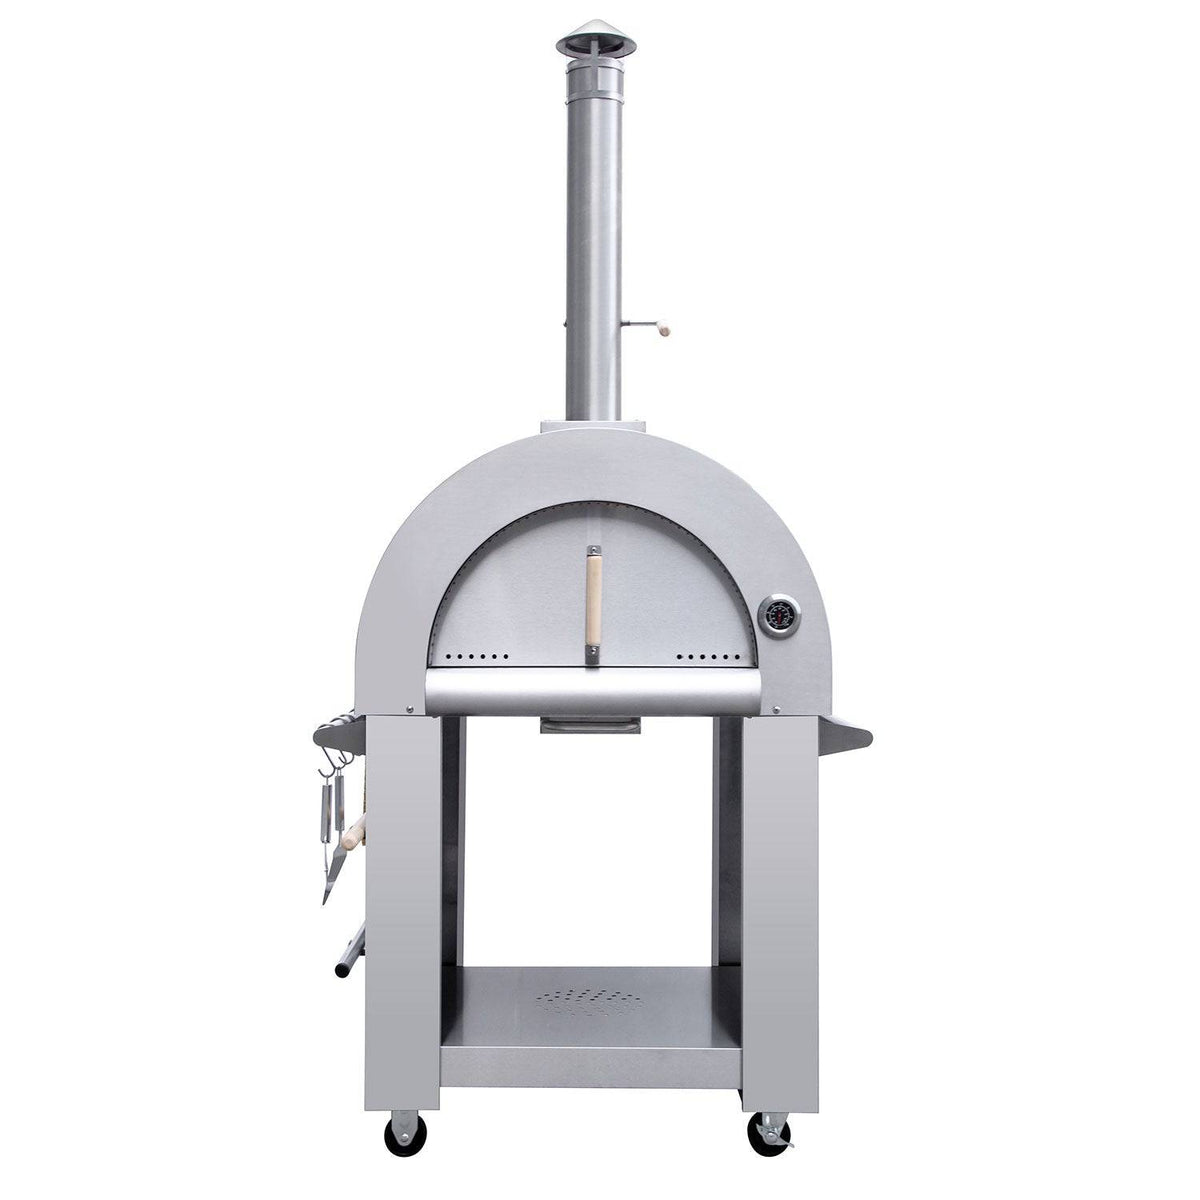 Fobest Kitchen Stainless Steel Freestanding Wood Burning Outdoor Pizza Oven